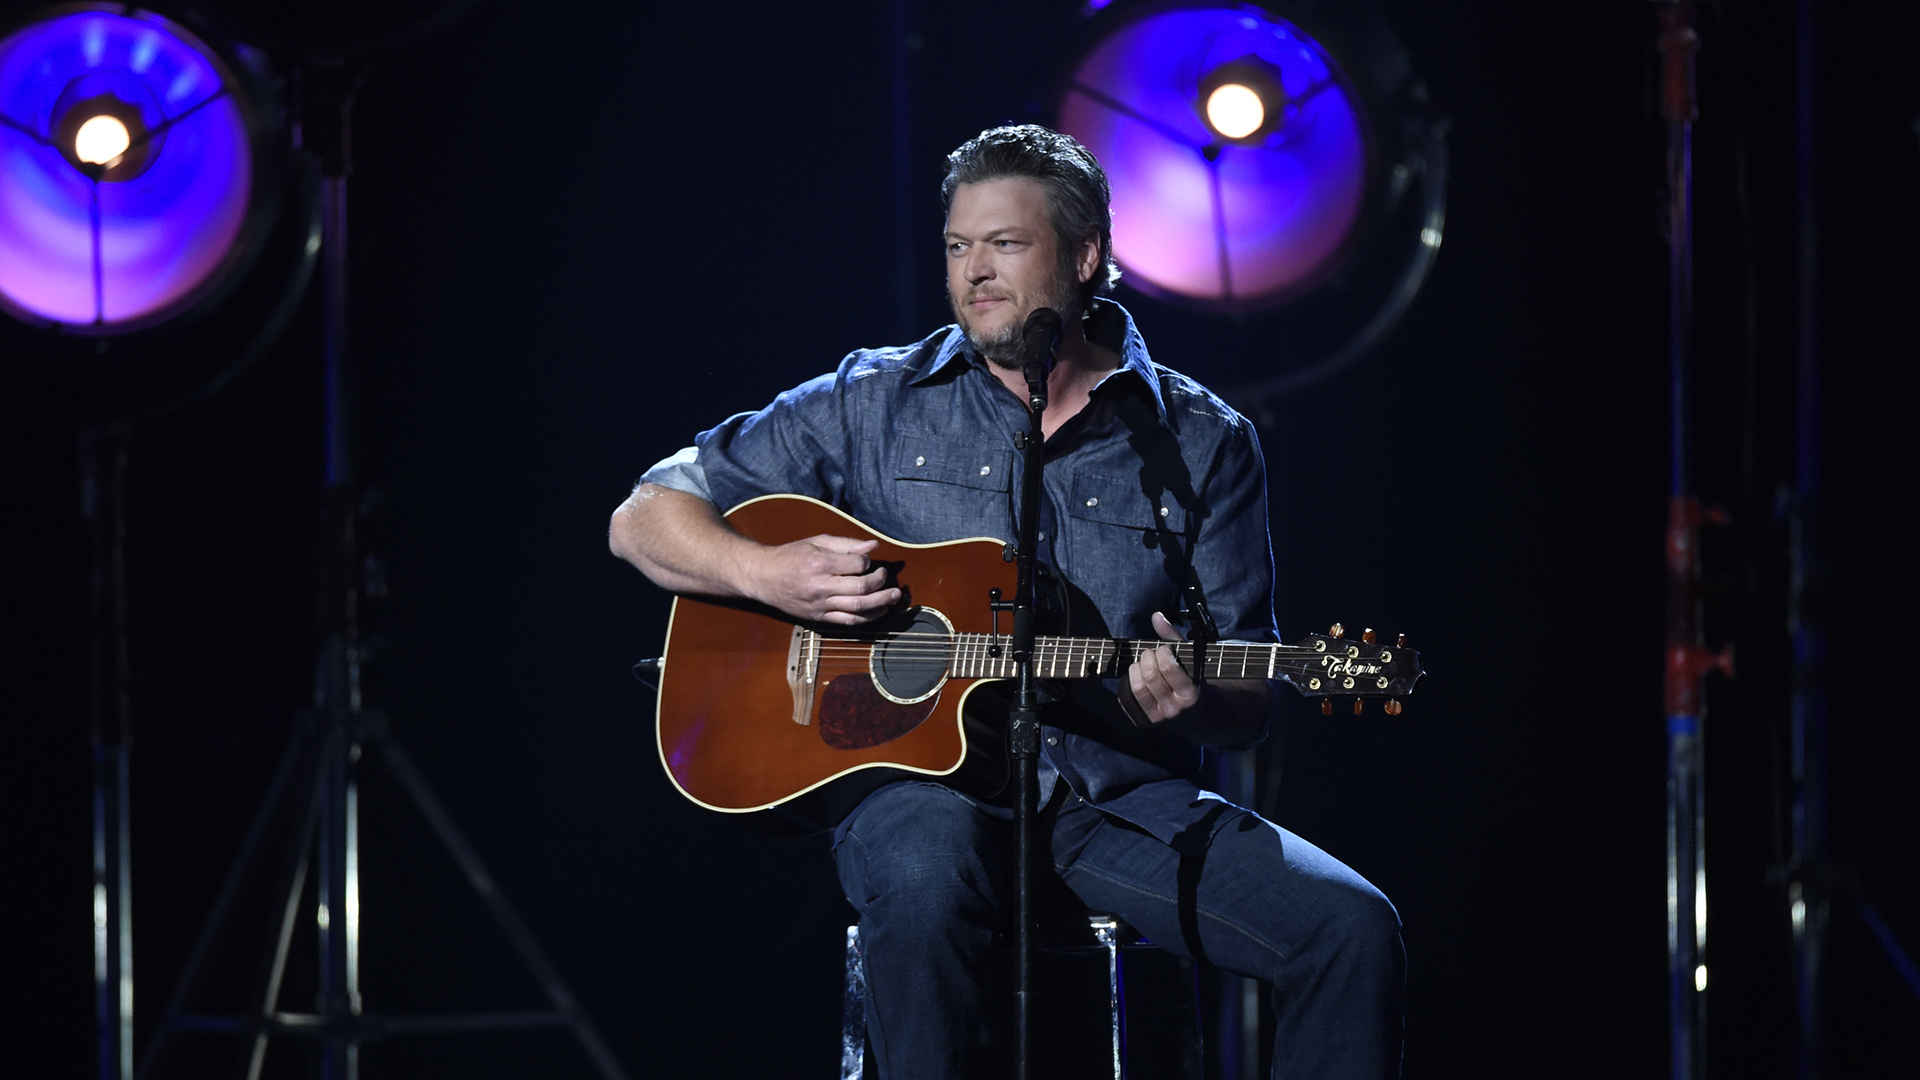 Accompanied by a violinist, Blake Shelton performs a stripped-down version of 